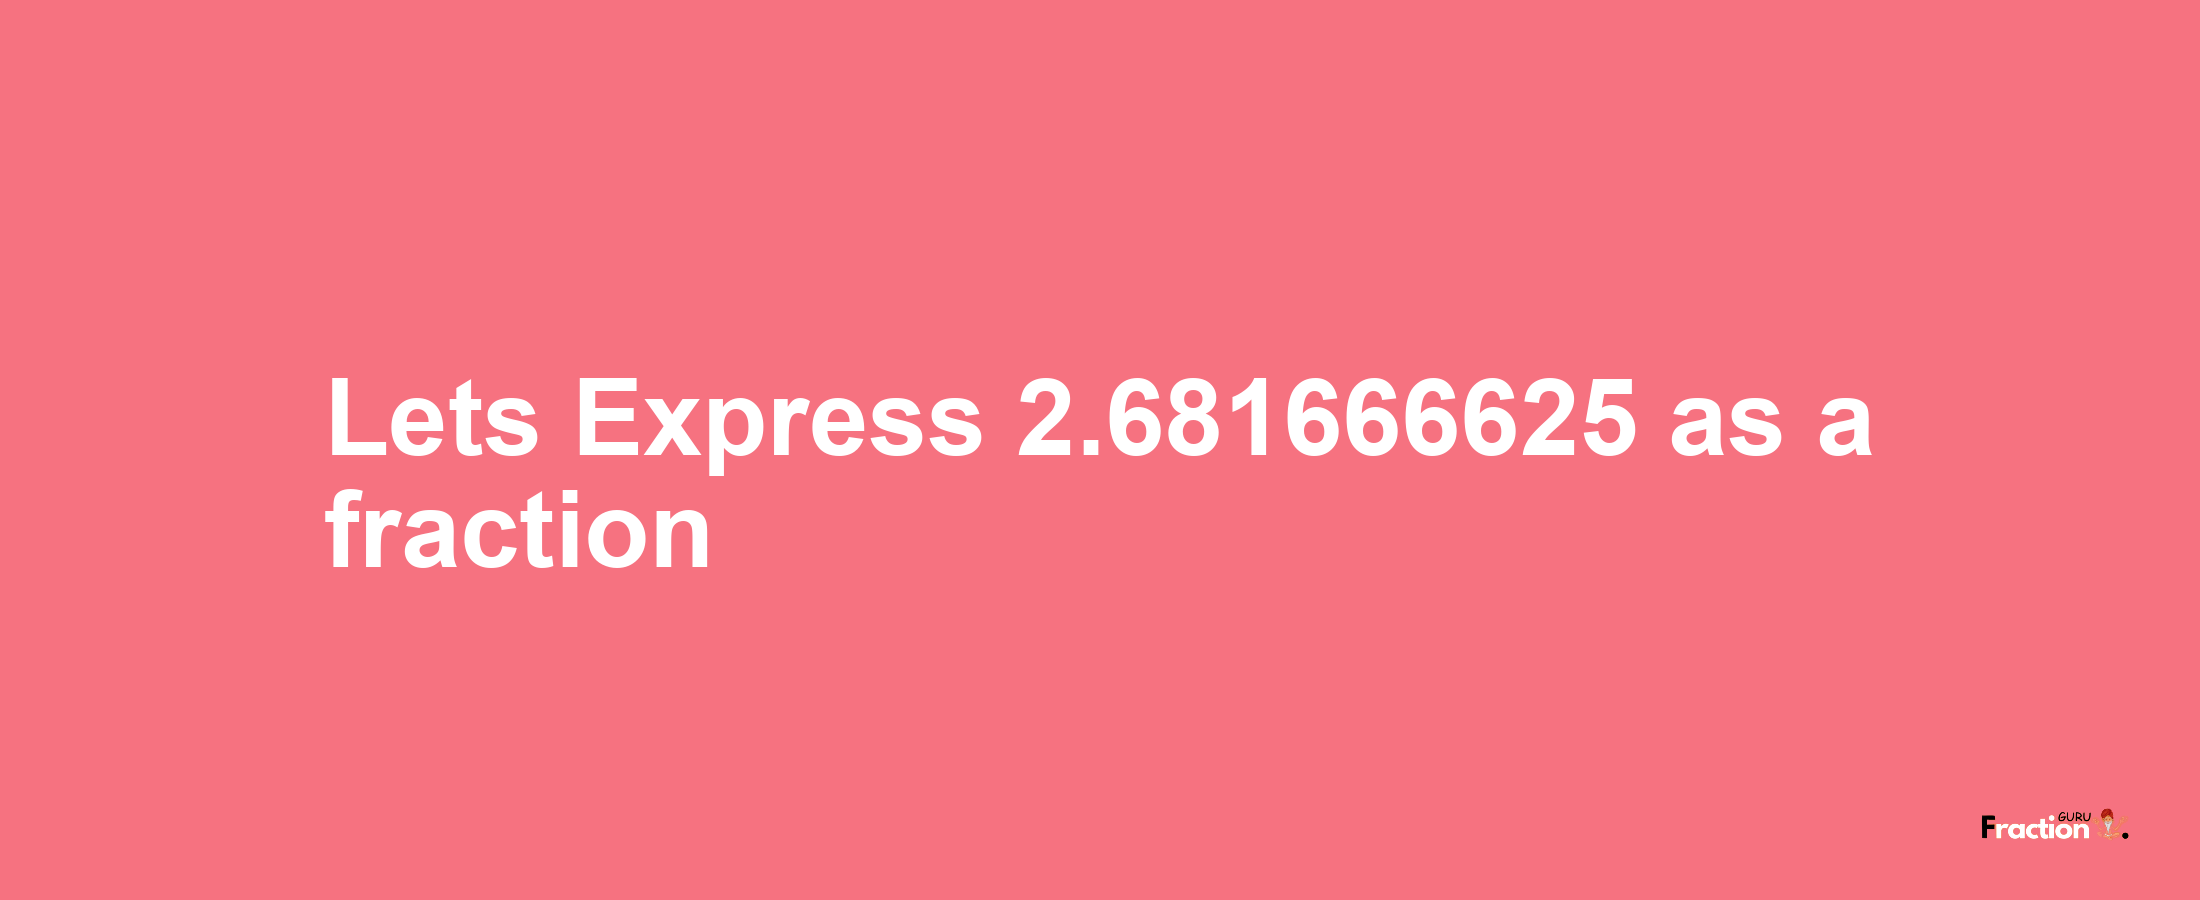 Lets Express 2.681666625 as afraction